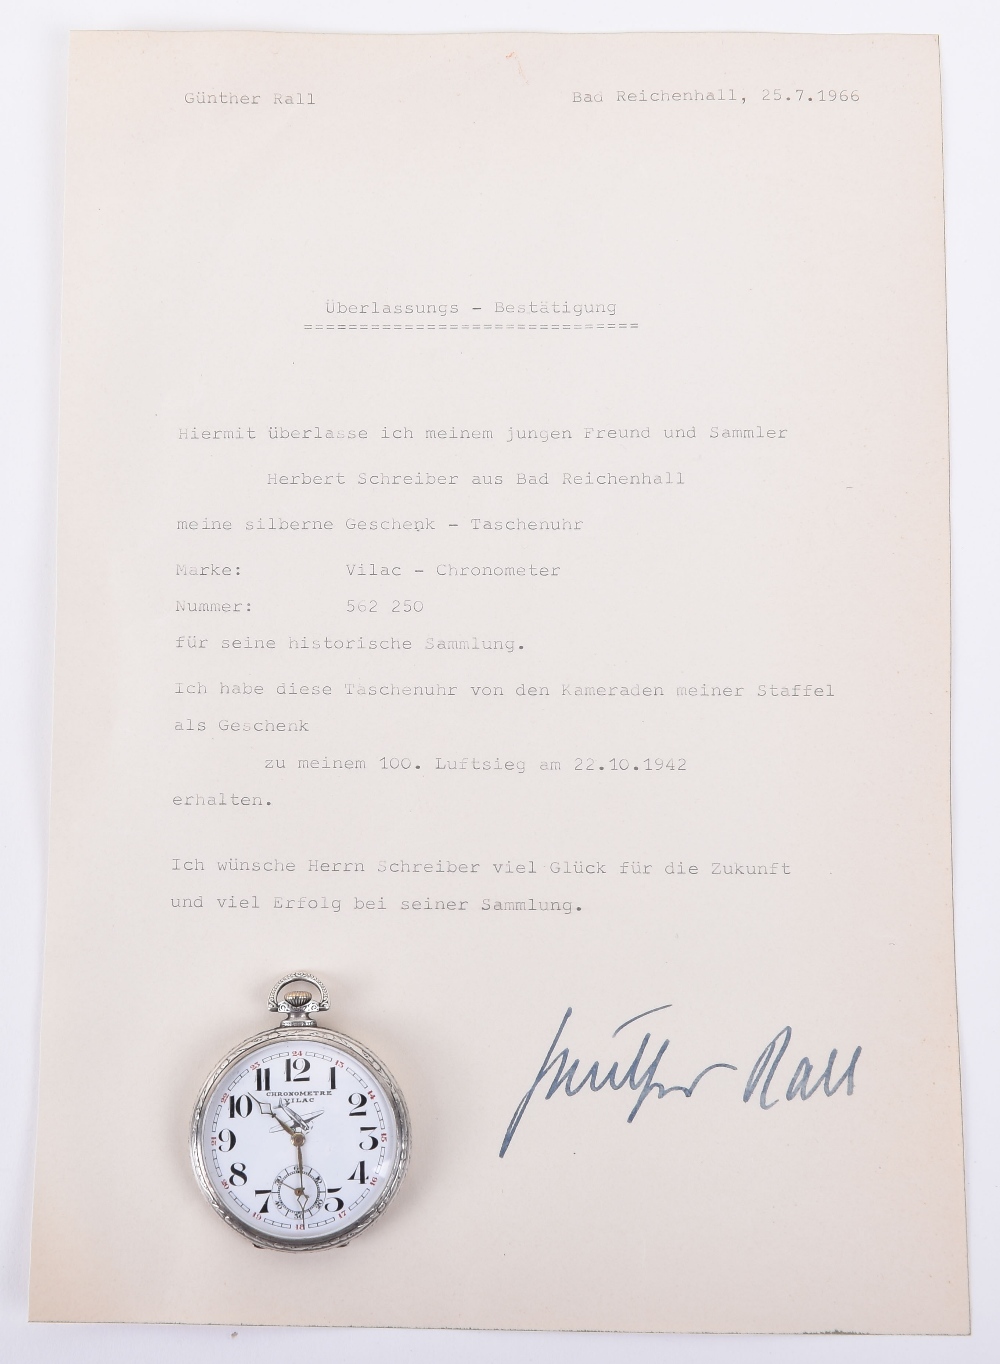 Gunther Rall Owned Pocket Watch Stated to be Awarded for his 100th Aerial Victory